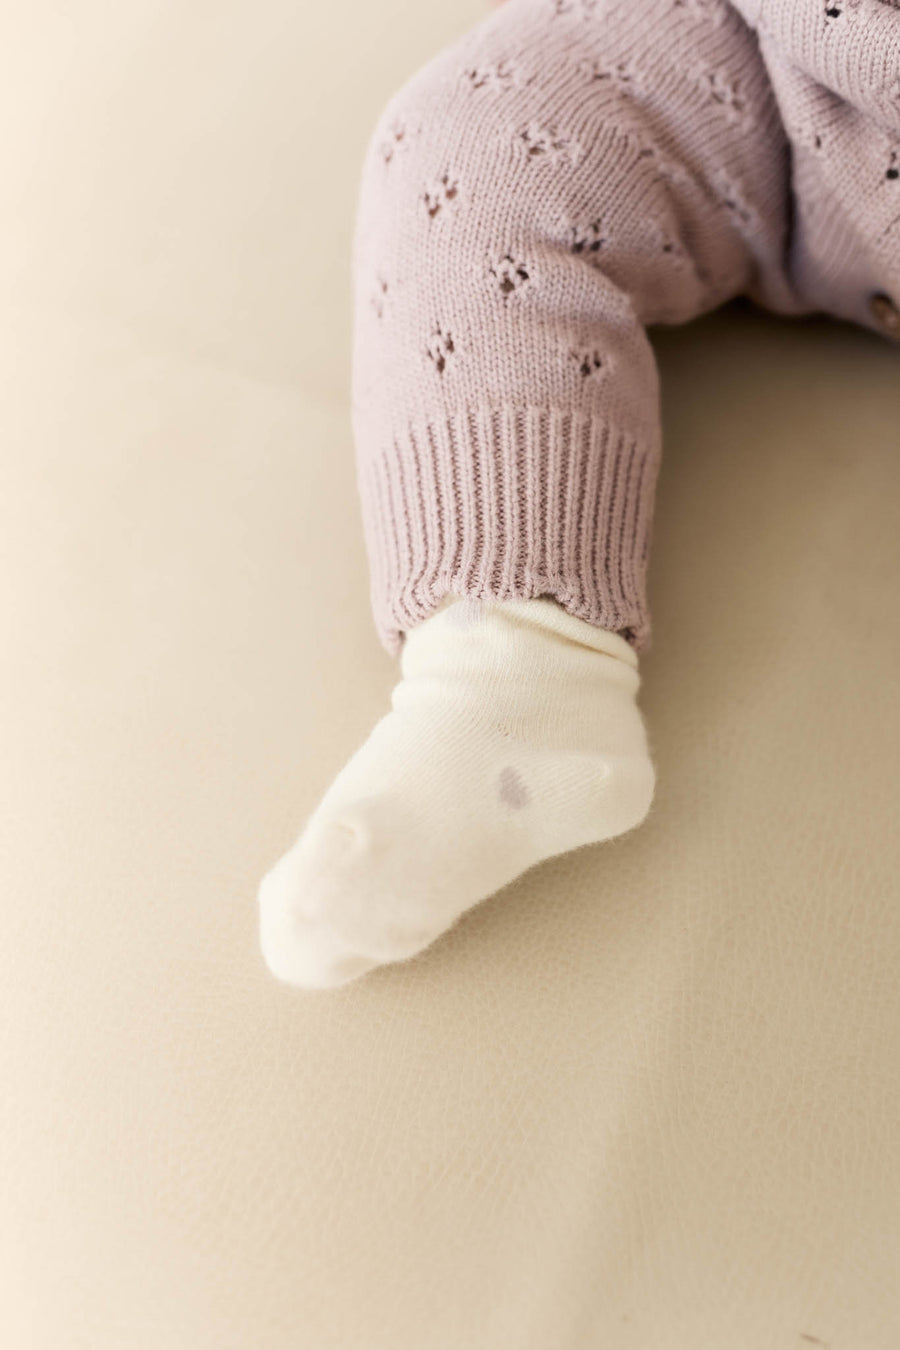 Harlow Sock - Petite Heart Parchment Childrens Sock from Jamie Kay USA